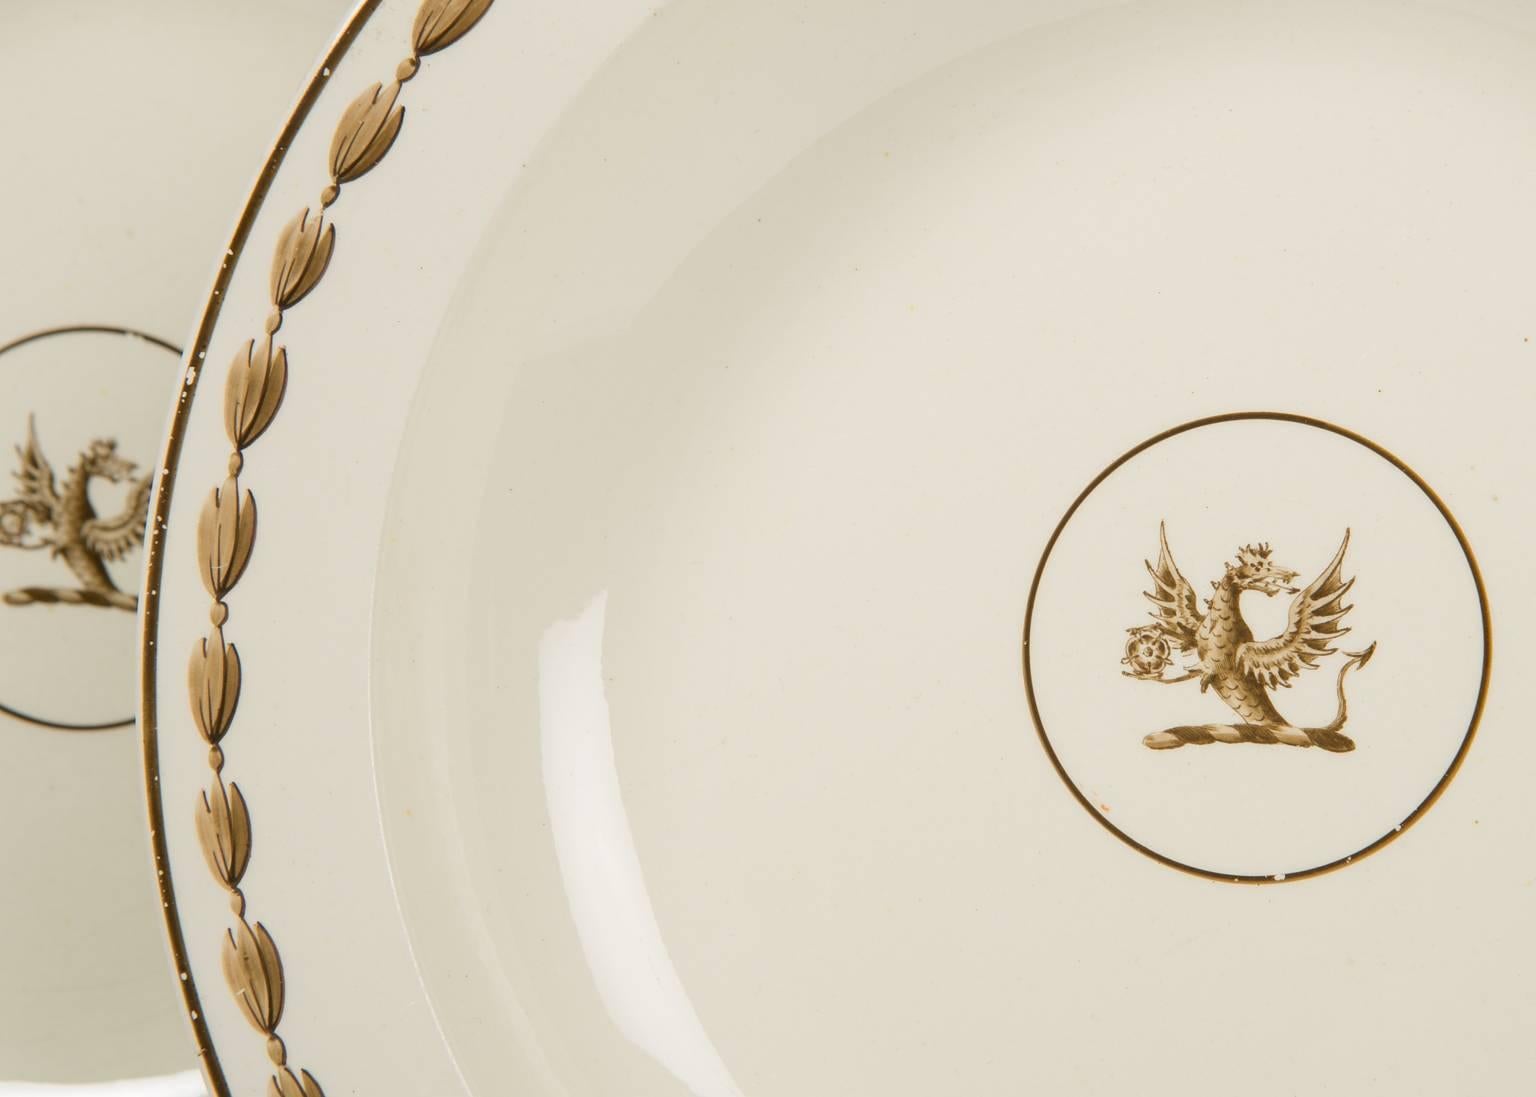 English Wedgwood Creamware Dishes with a Dragon Crest